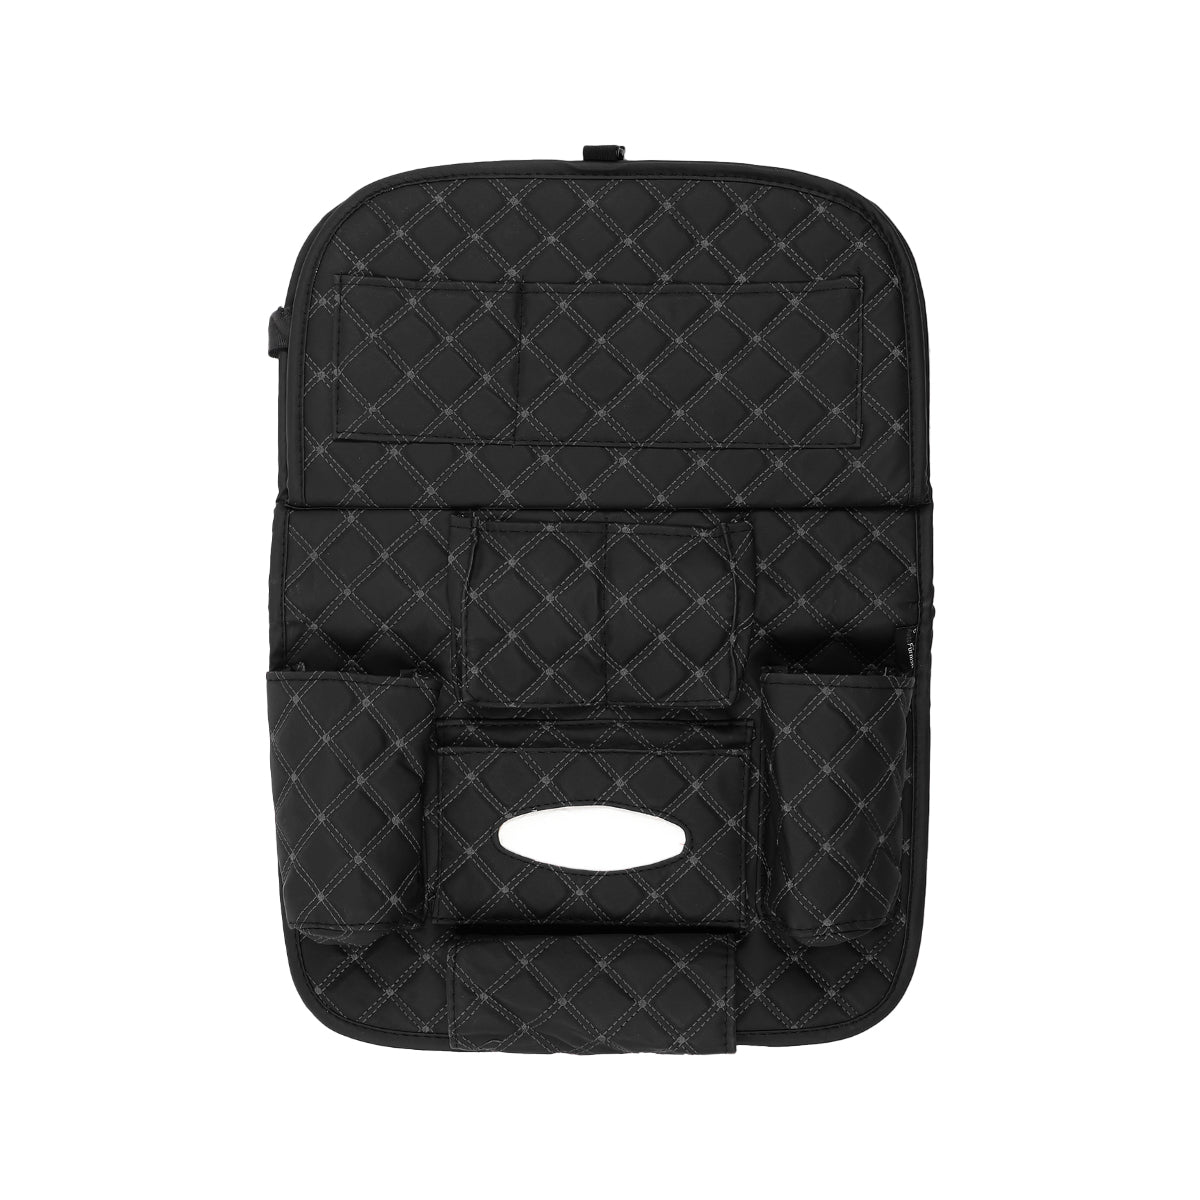 7D PREMIUM Car Seat Organizer | PU Leather with Folding Meal Tray and 10 Pockets - Tissues, Bottles, Phones, iPad Mini, Documents, Umbrella